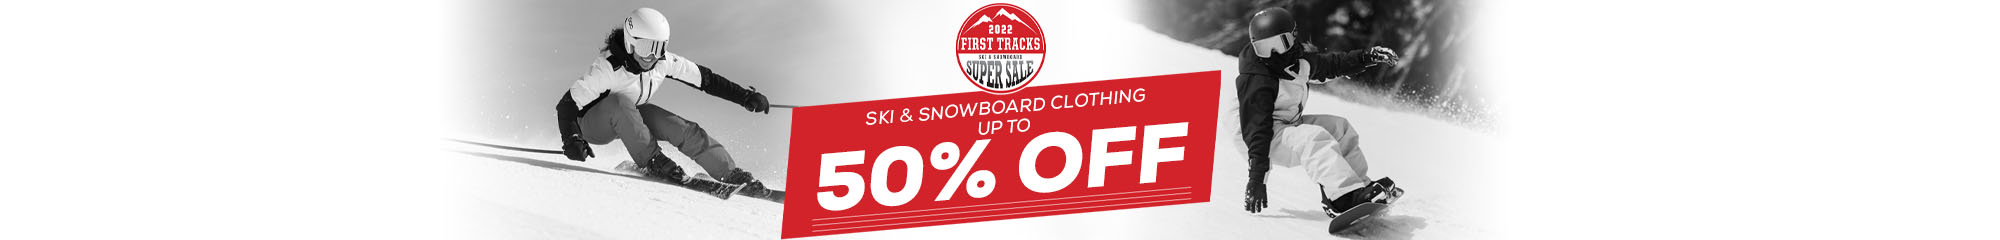 2022 First Tracks Ski & Snowboard Super Sale. Save up to 50% Off Ski & Snowboard Clothing. Click to shop base layer deals.
